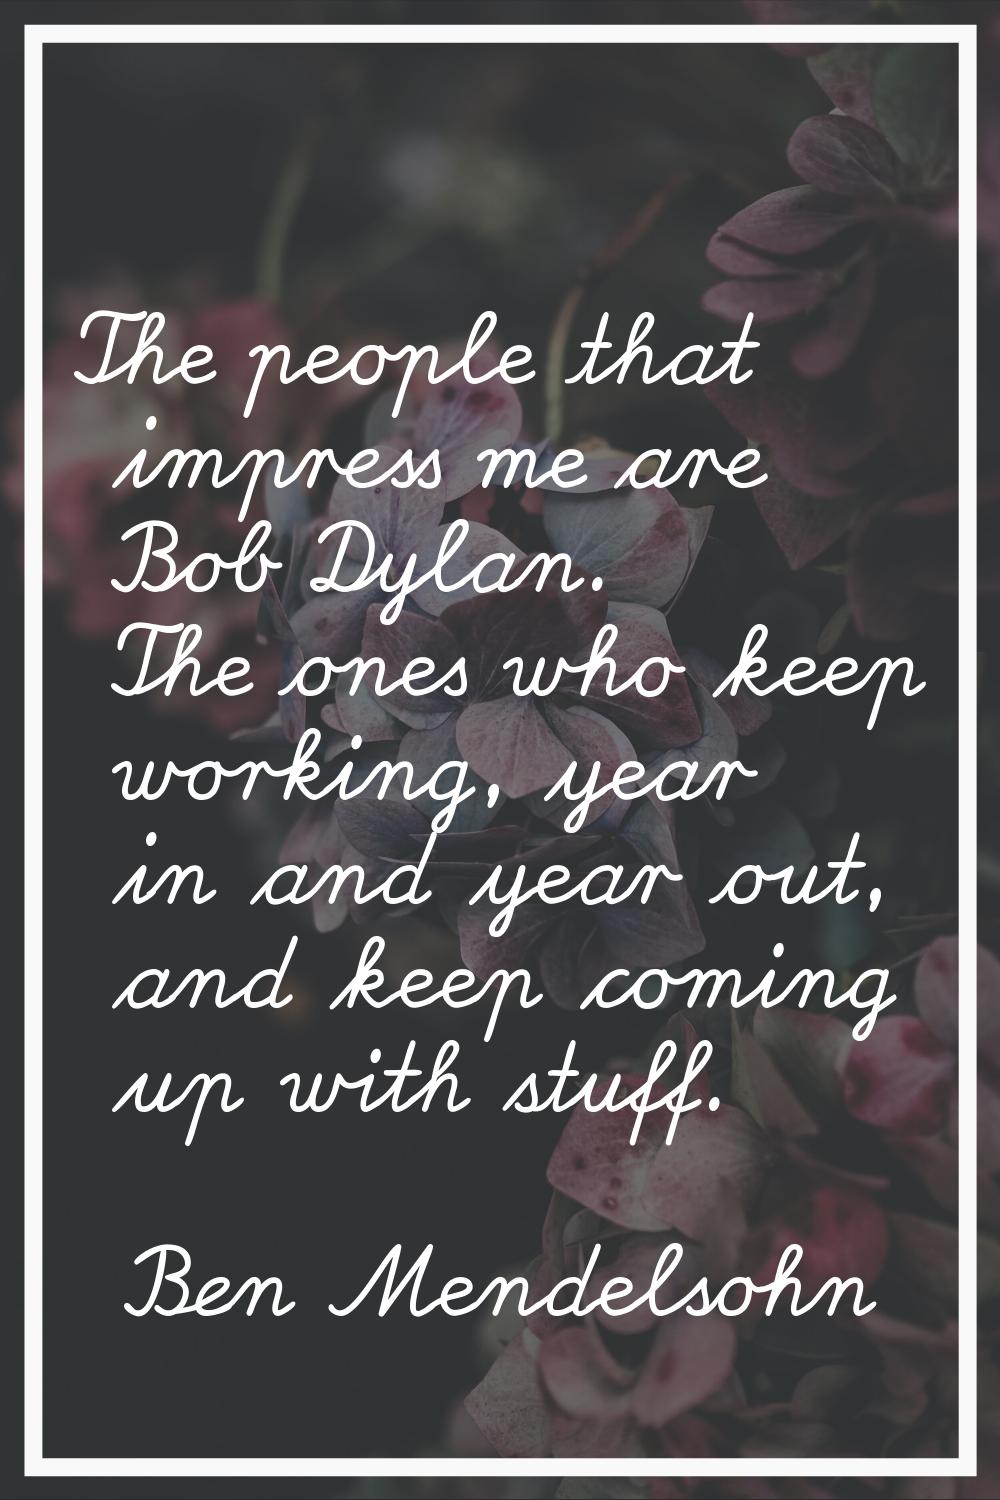 The people that impress me are Bob Dylan. The ones who keep working, year in and year out, and keep